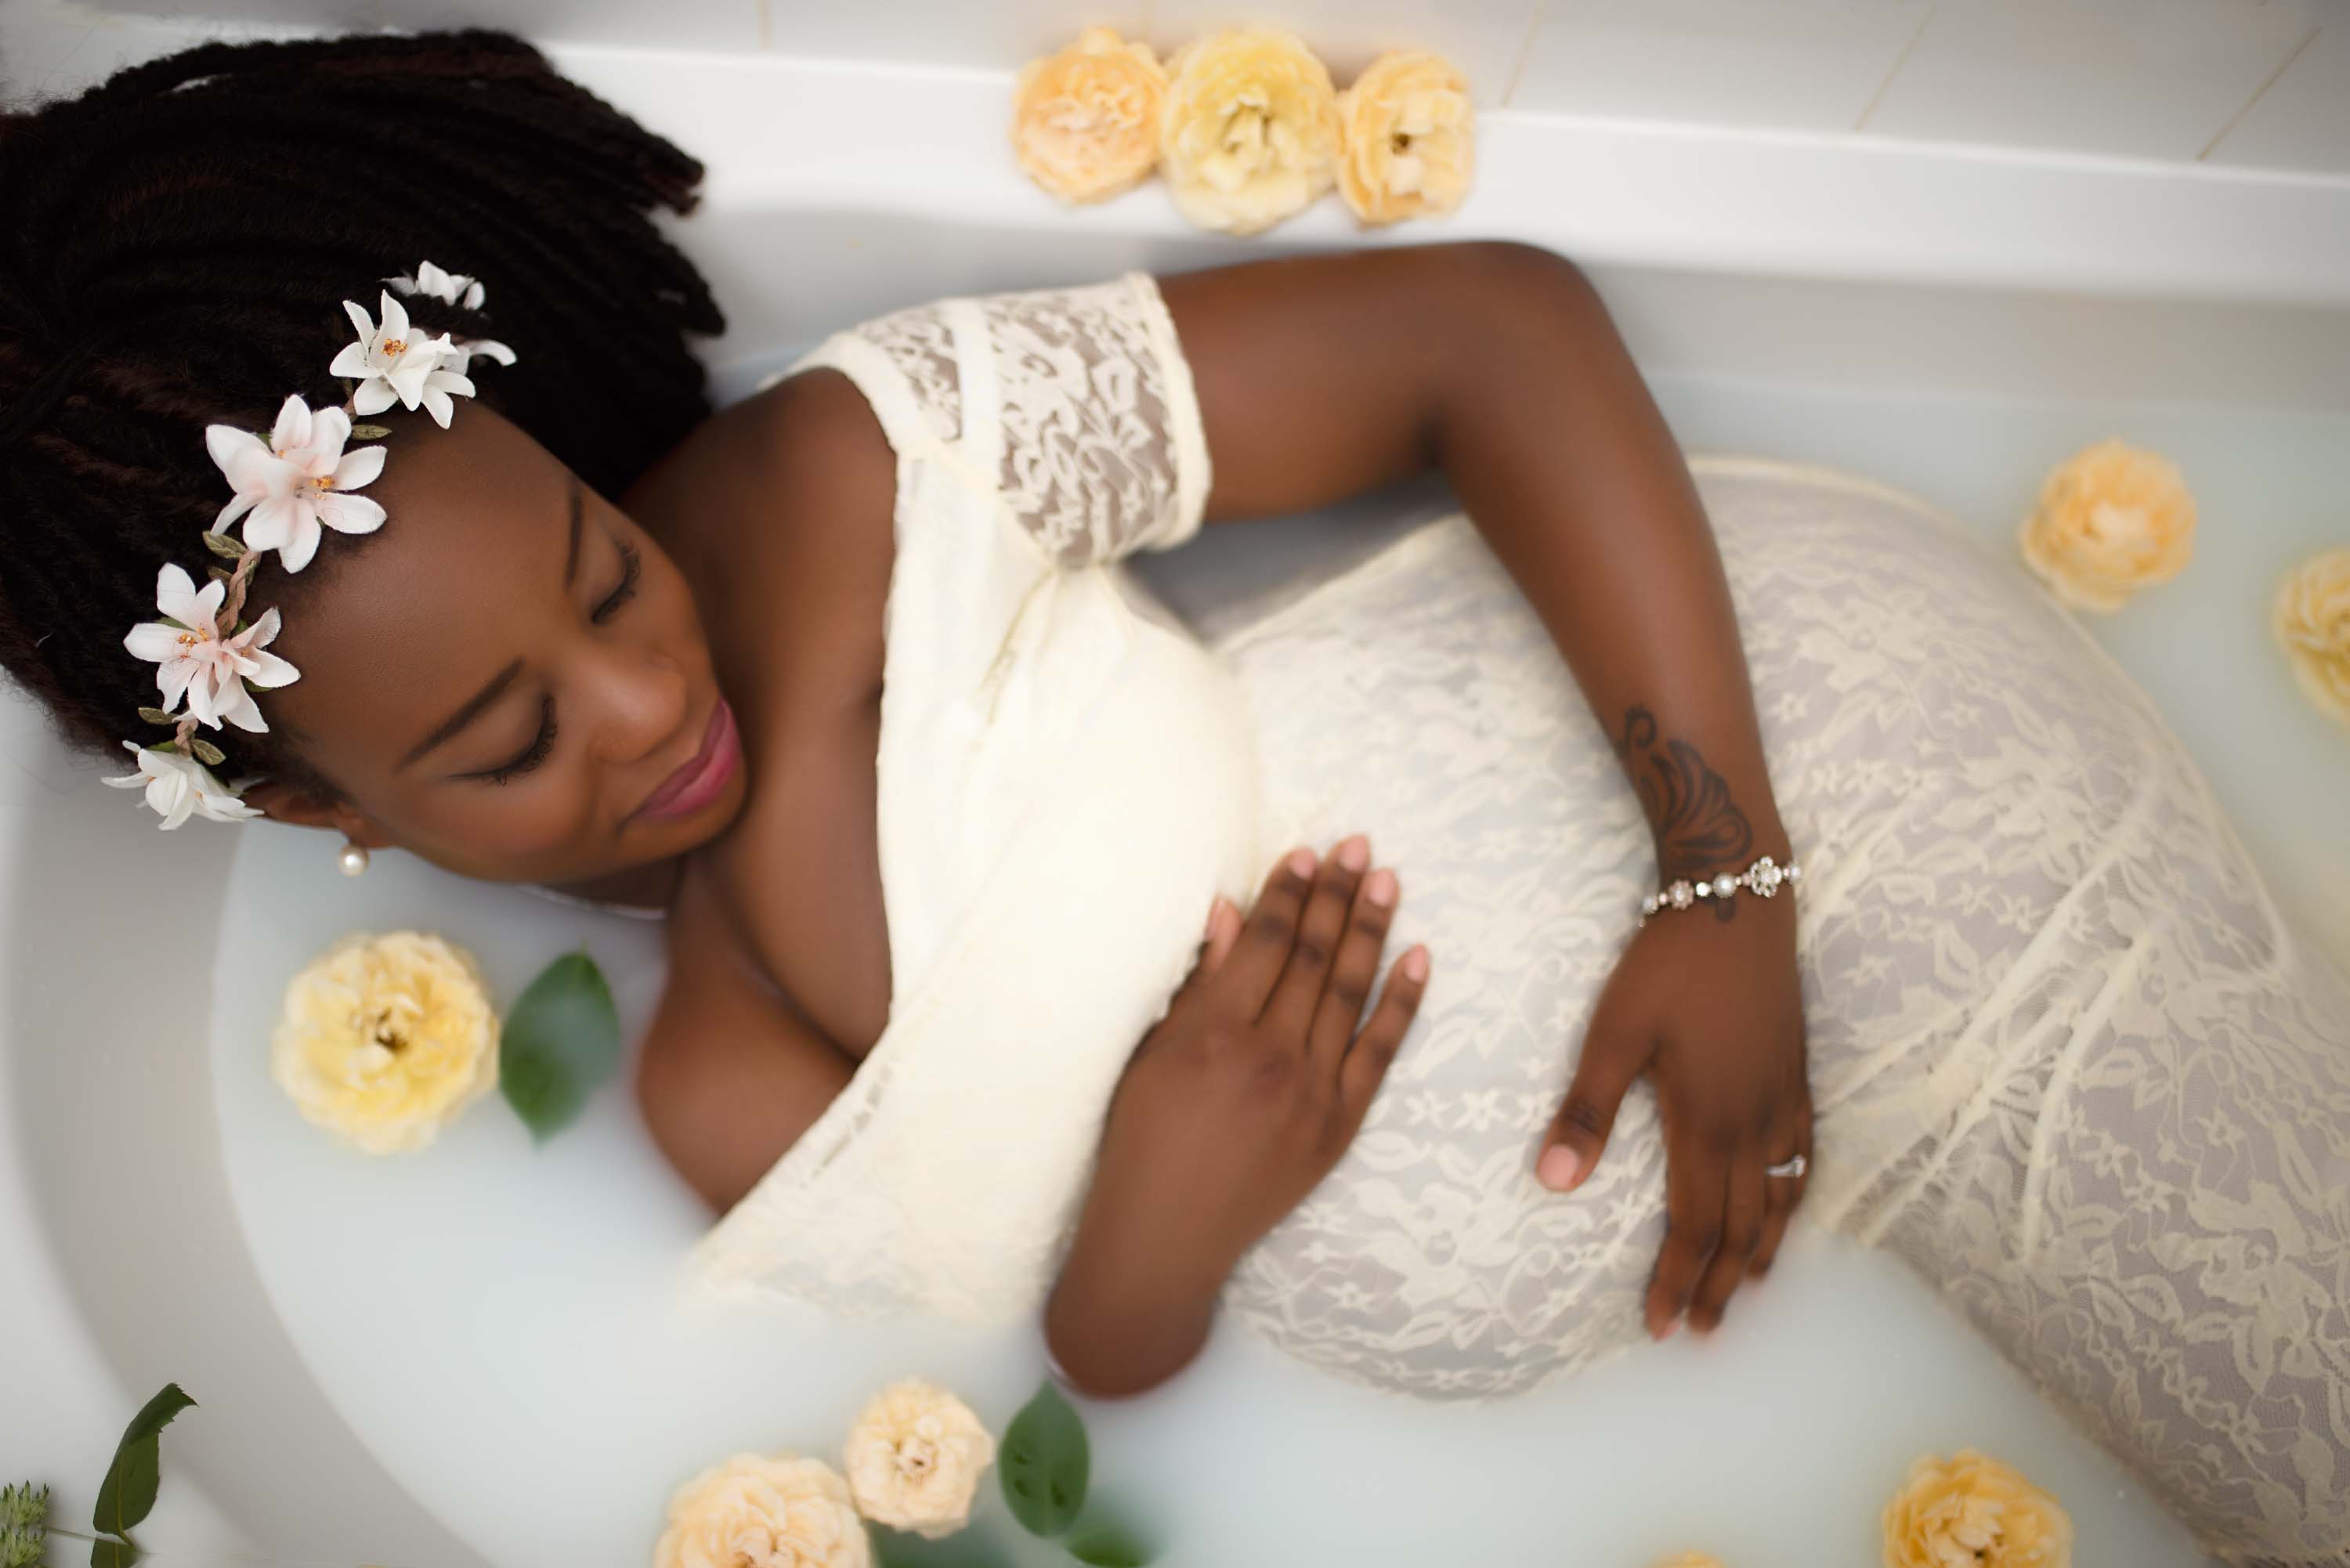 Women wearing maternity dress and floral crown in milk bath